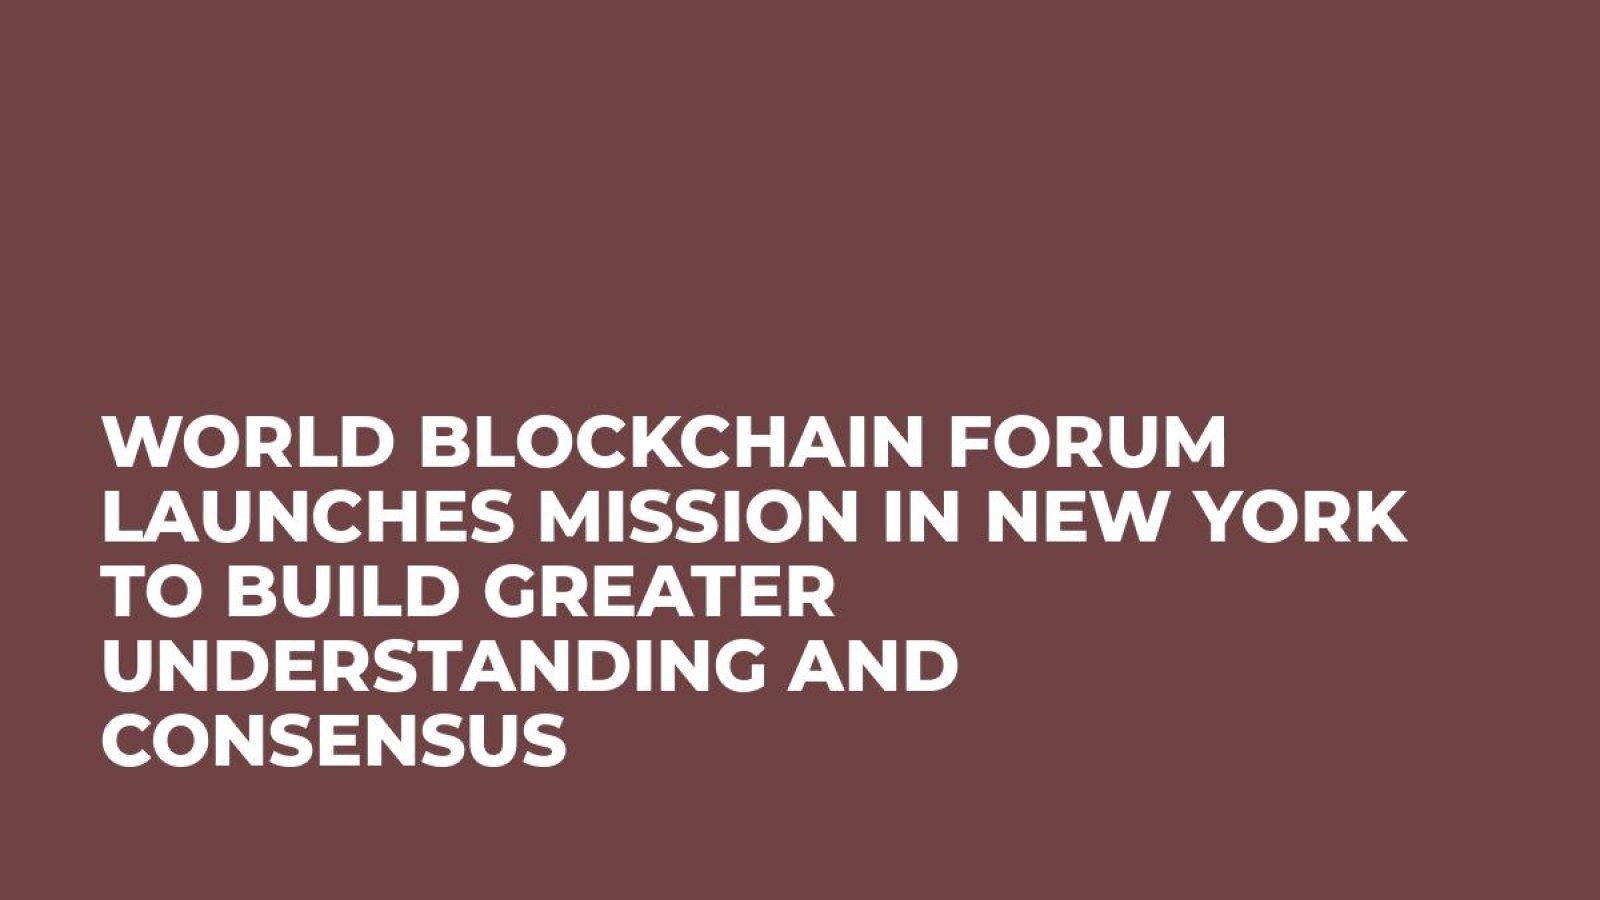 World Blockchain Forum Launches Mission in New York to Build Greater Understanding and Consensus